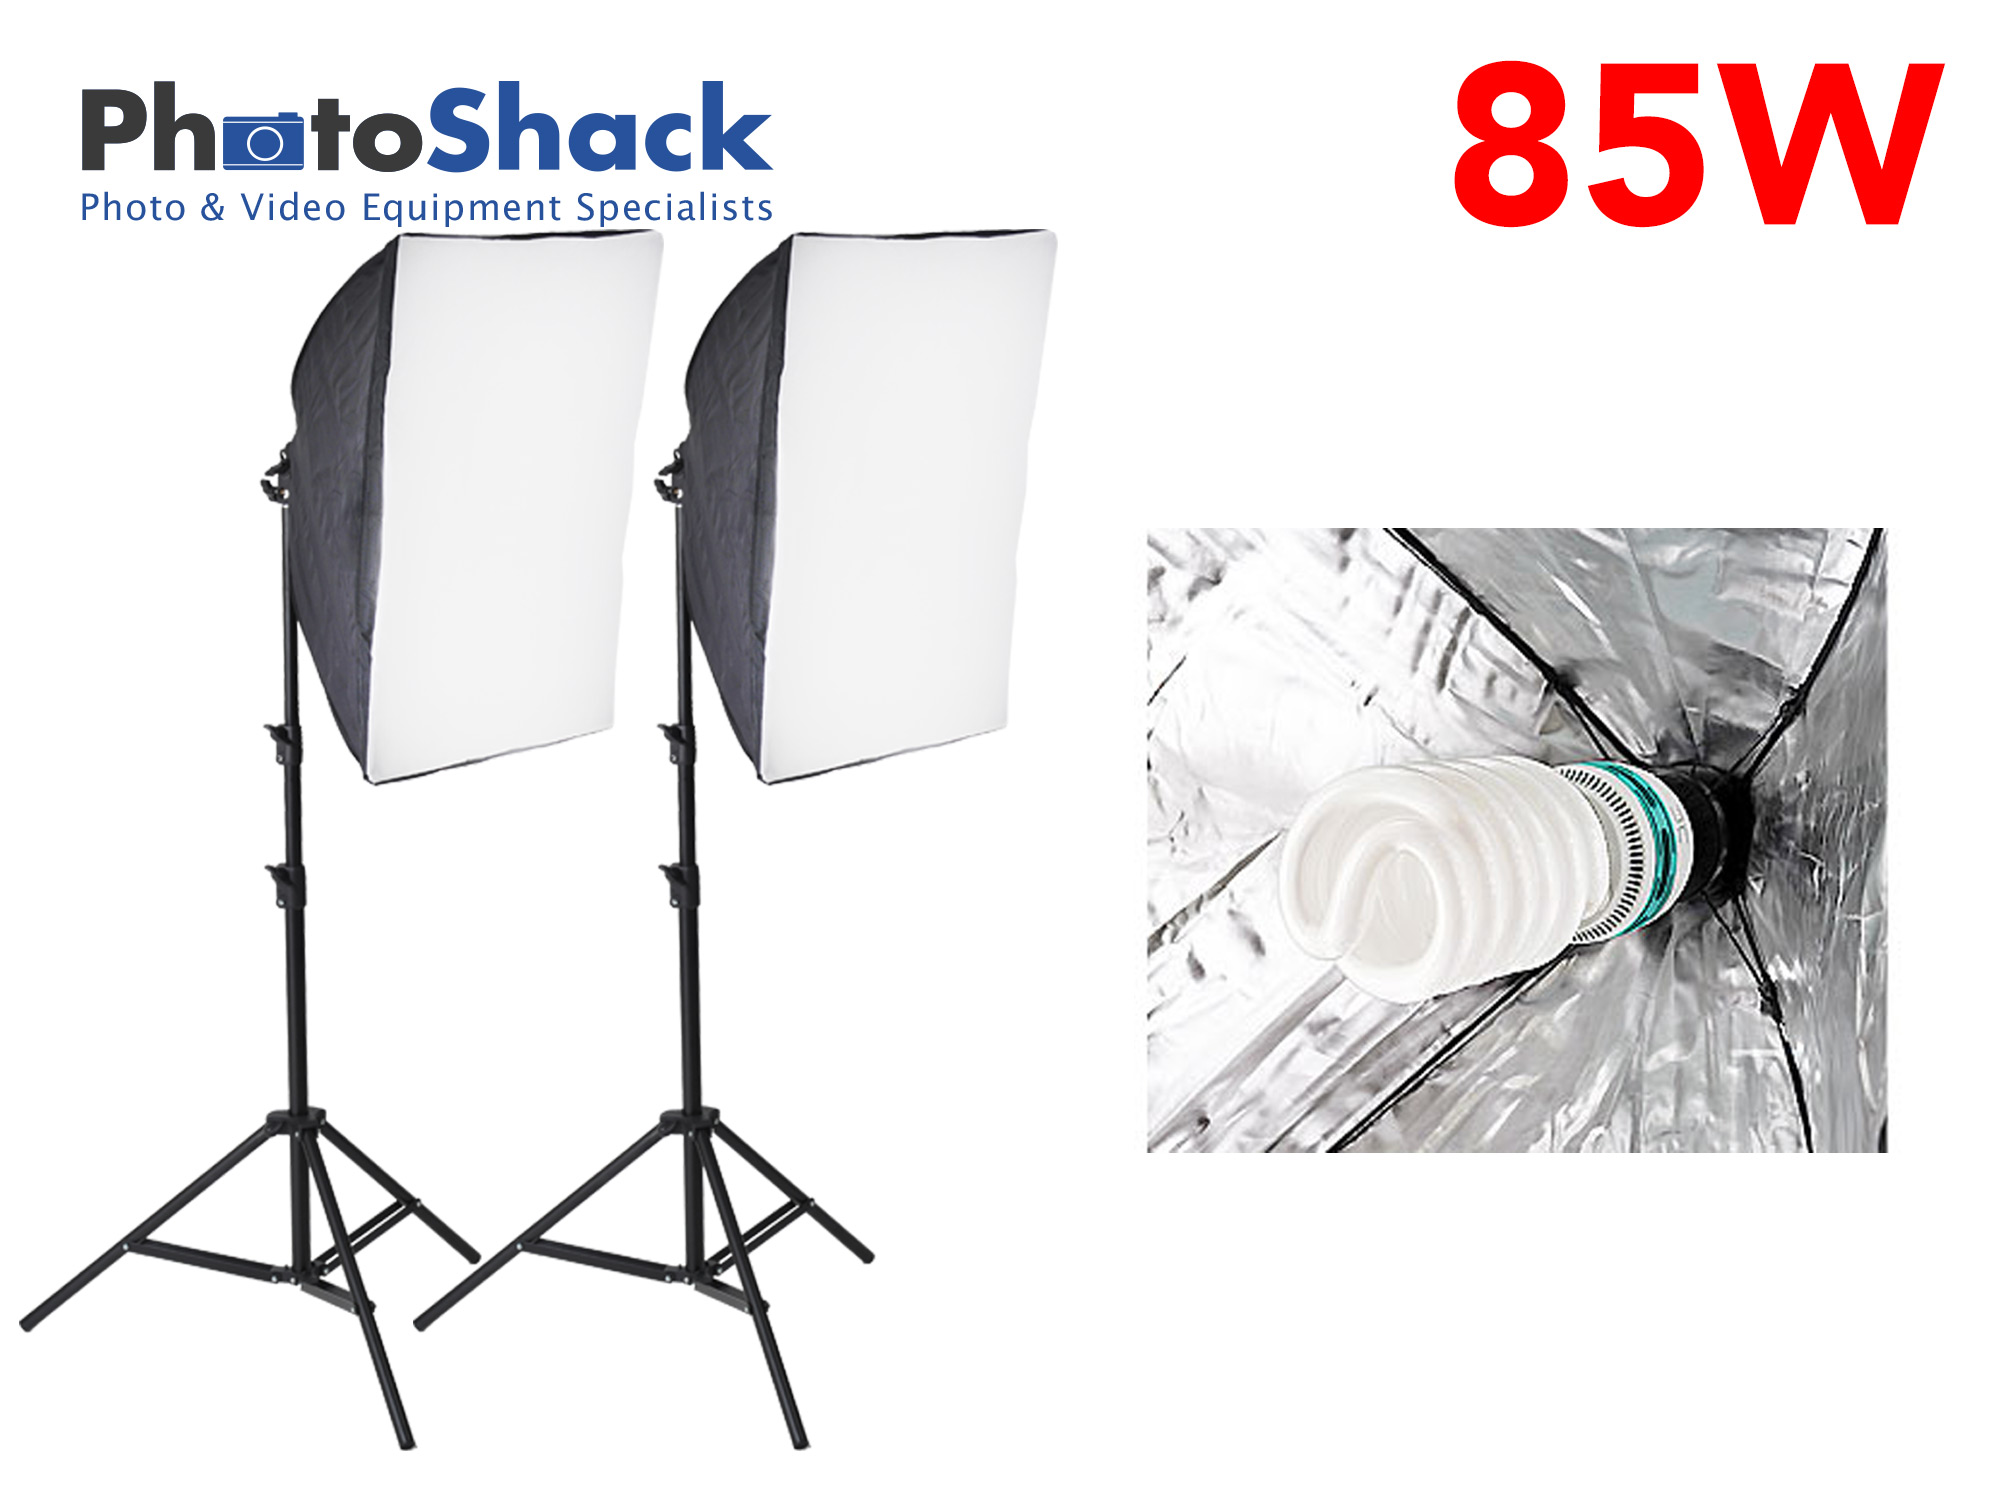 Continuous Lighting Set with 2 85W Lights + Softboxes + 2m light stands